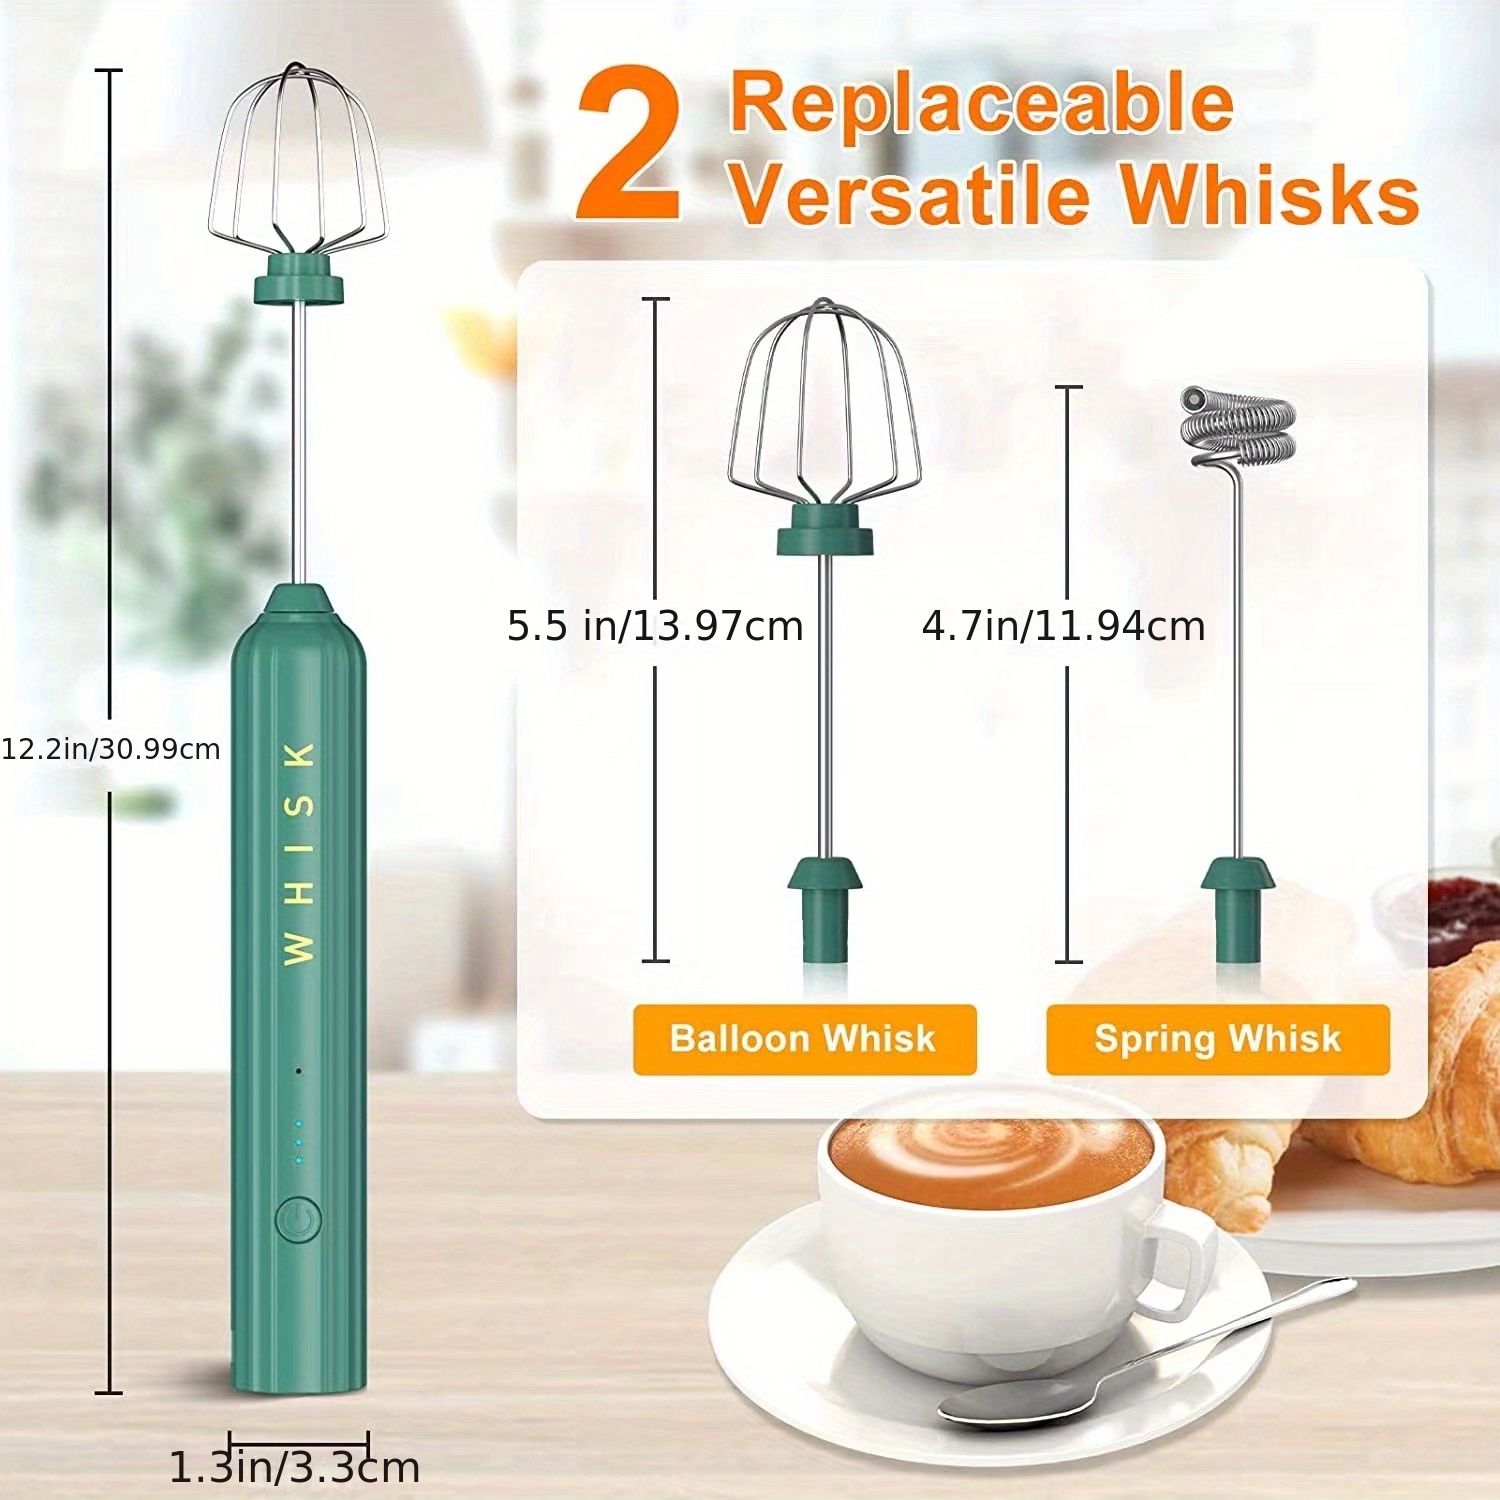 1pc milk frother for coffee 2000 power handheld frother electric whisk milk foamer mini mixer and coffee blender frother for frappe latte matcha two types of double ended details 5